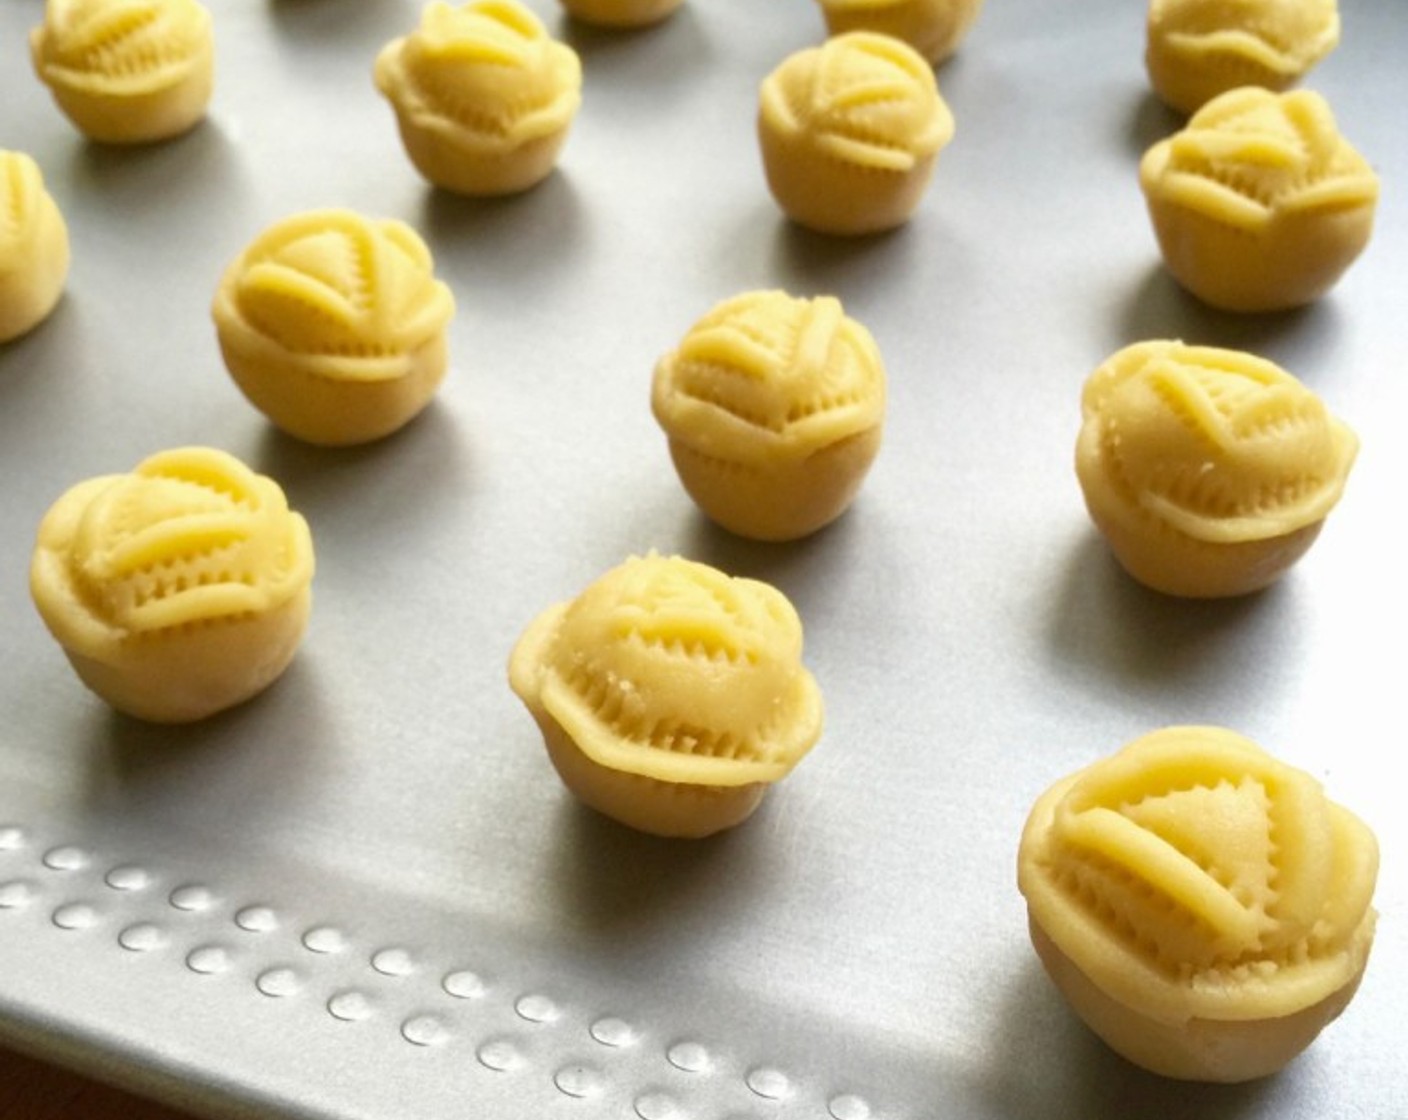 step 17 Continue to roll and crimp for the rest of the pineapple rolled dough balls. Then arrange the rose shape pineapple tarts on a baking tray.